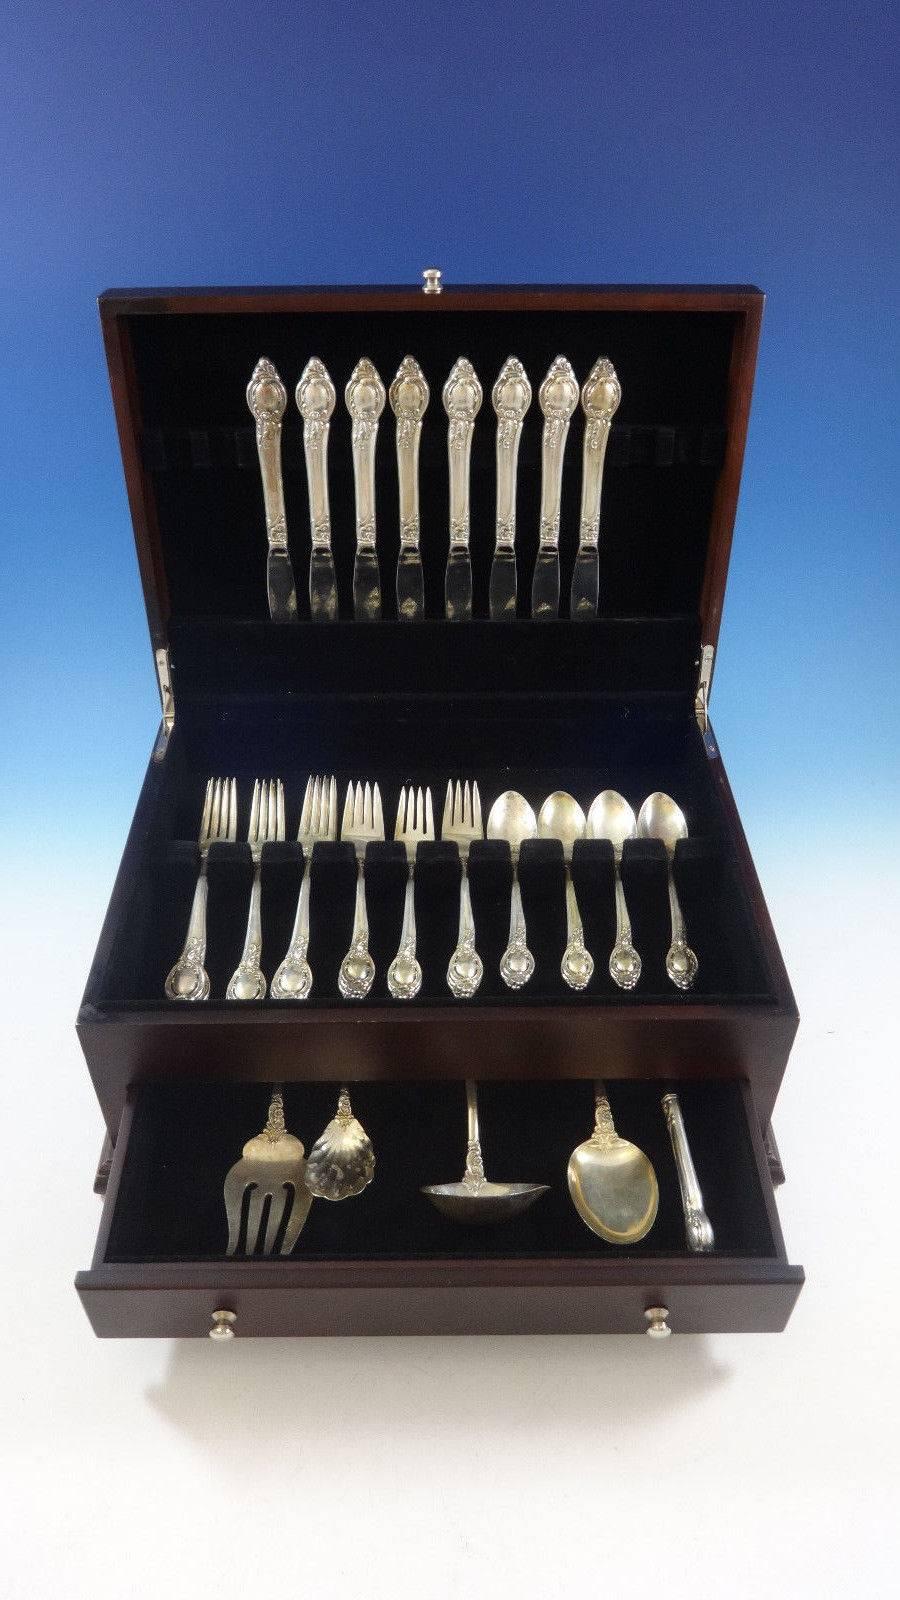 Cameo by Reed & Barton sterling silver flatware set, 37 pieces. This set includes: 

eight knives, 9